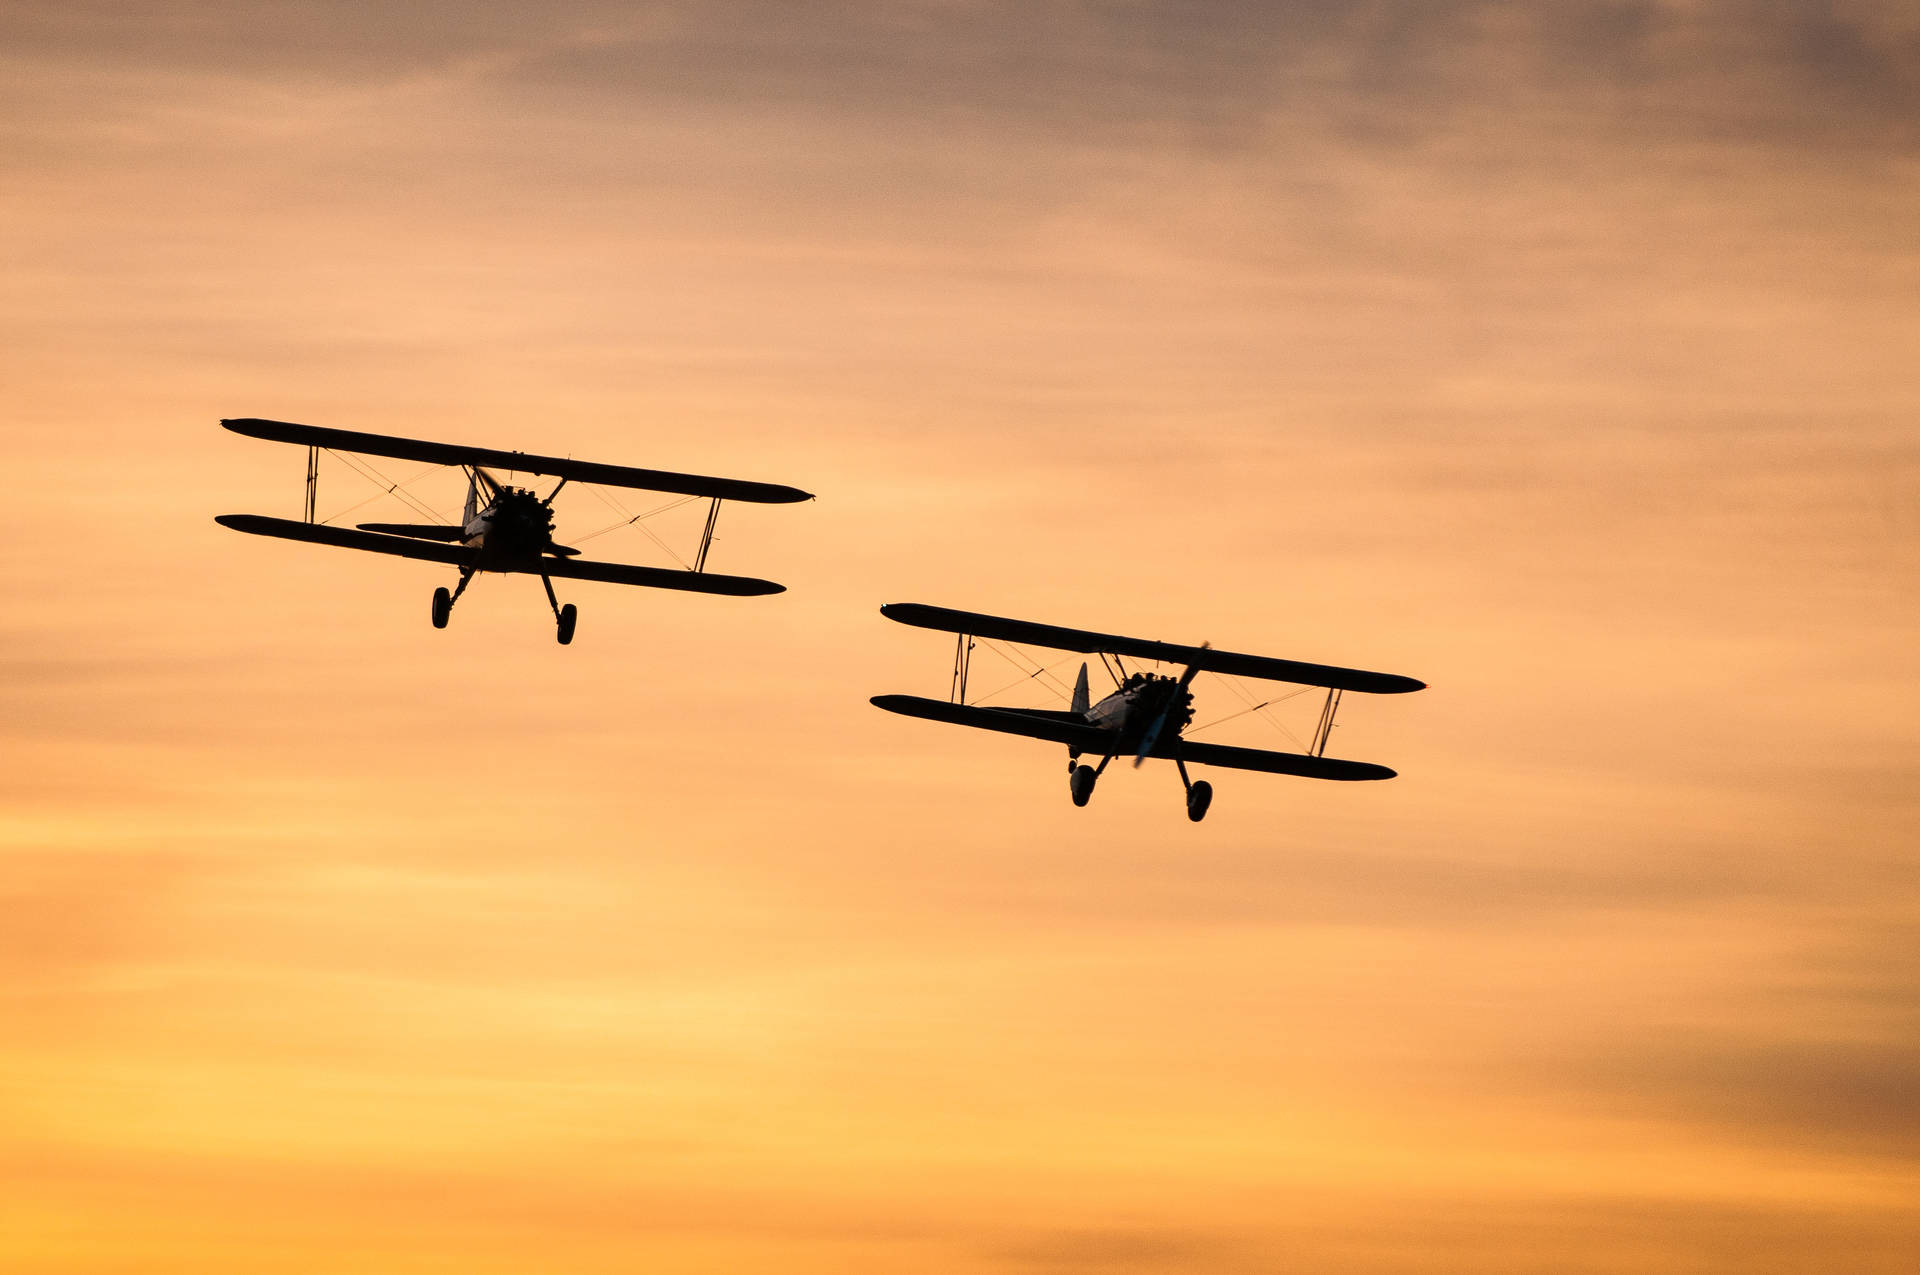 Small Planes In Sunset Sky